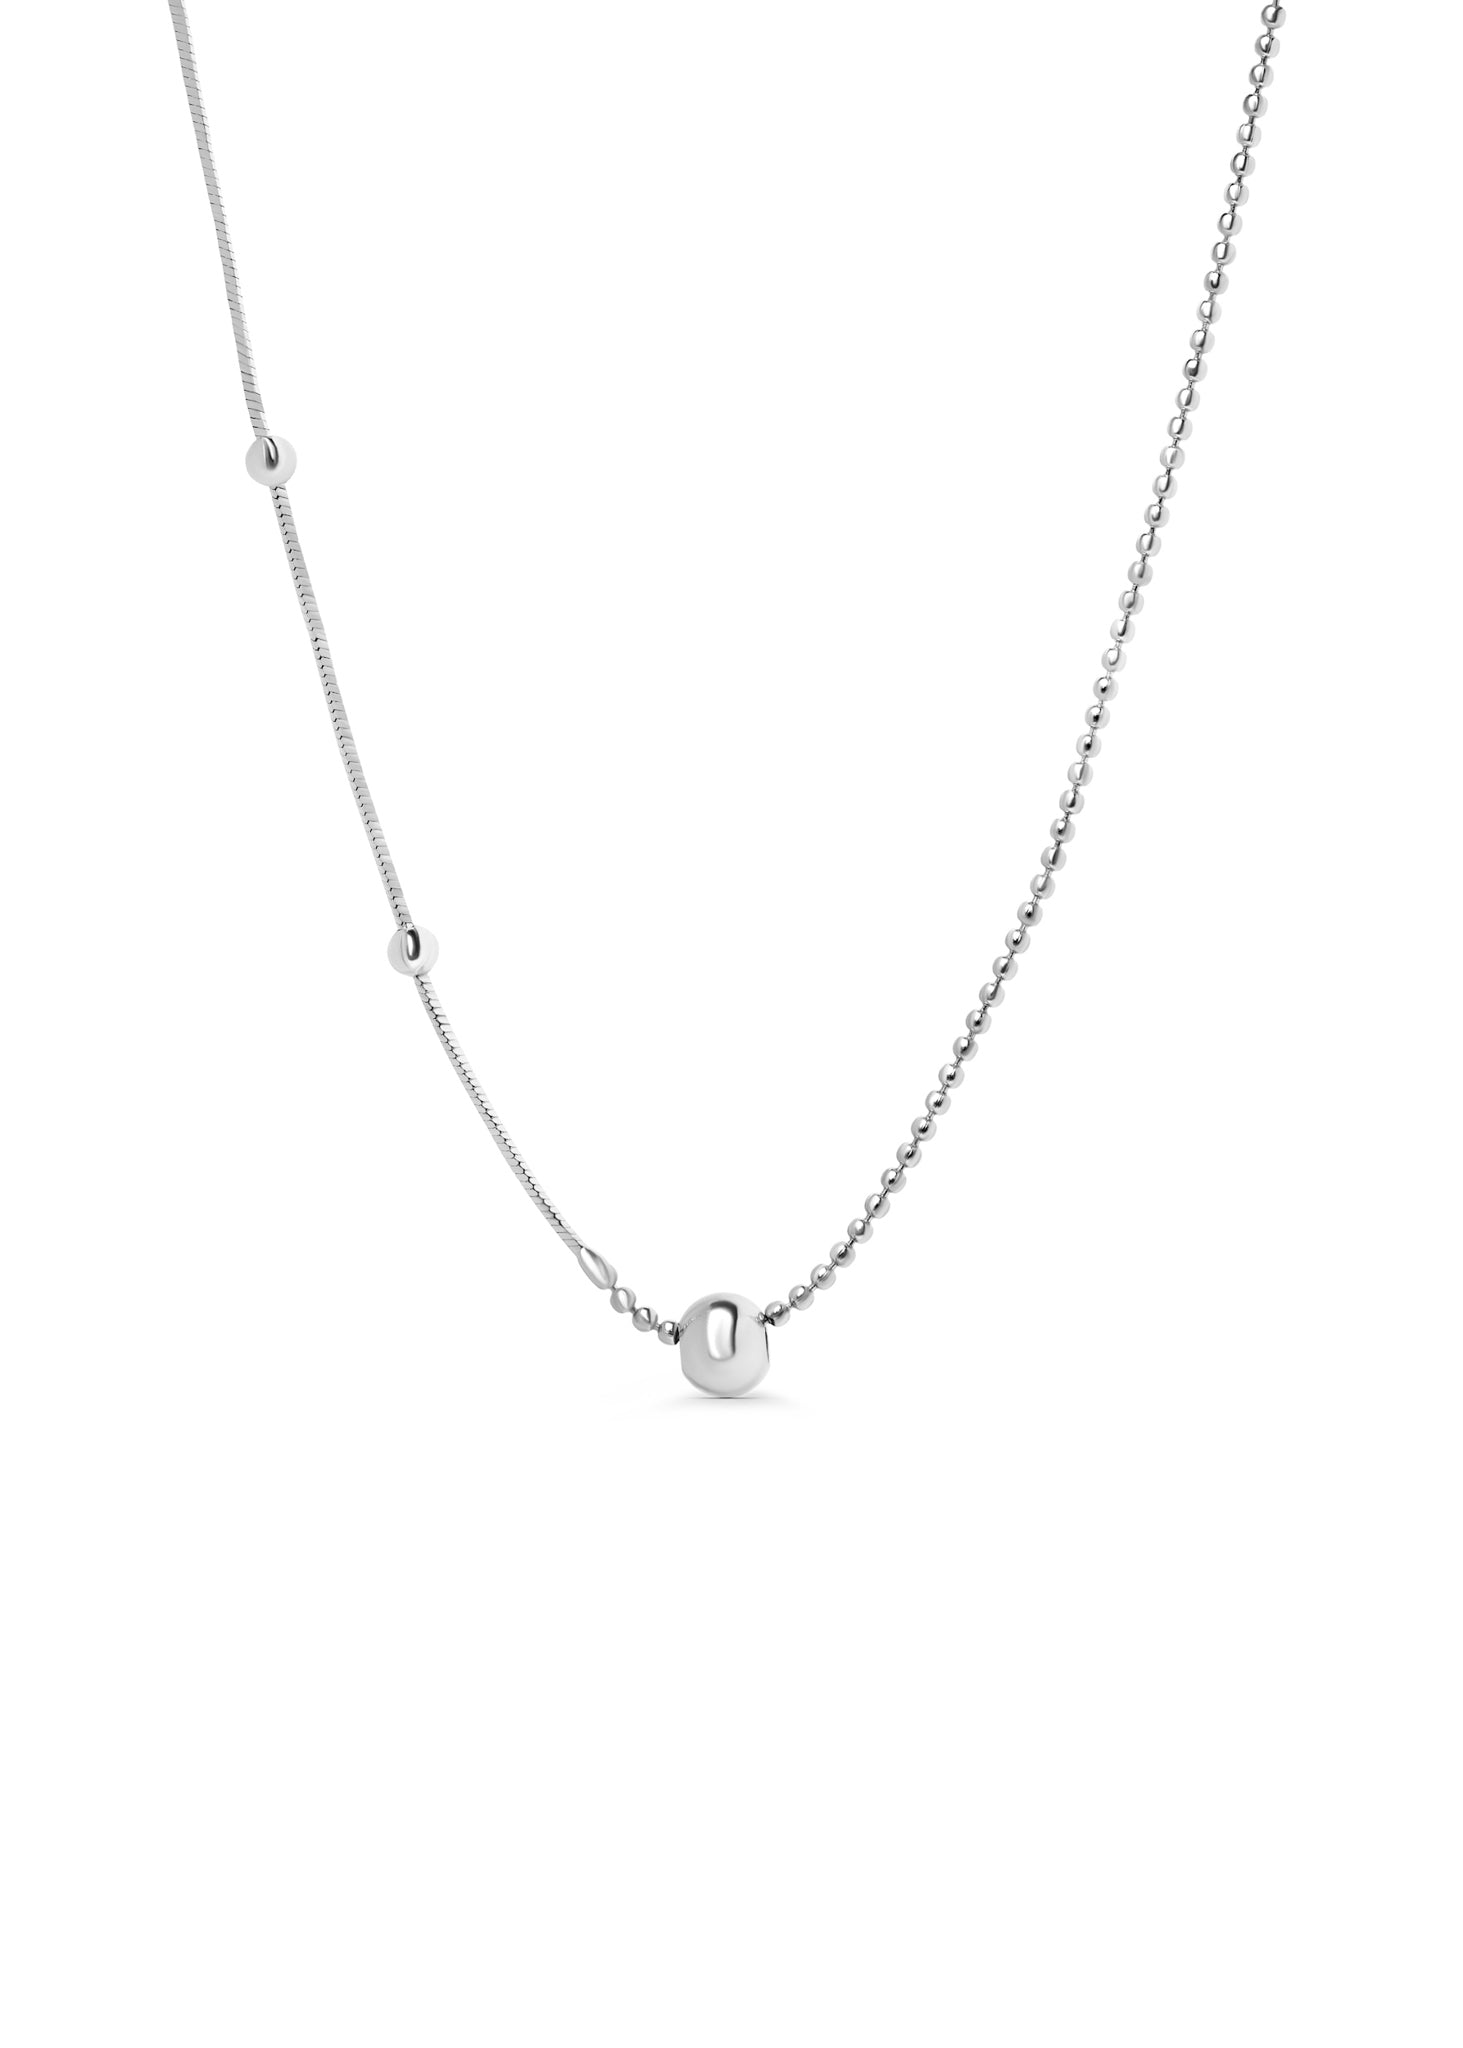 Silver droplets necklace